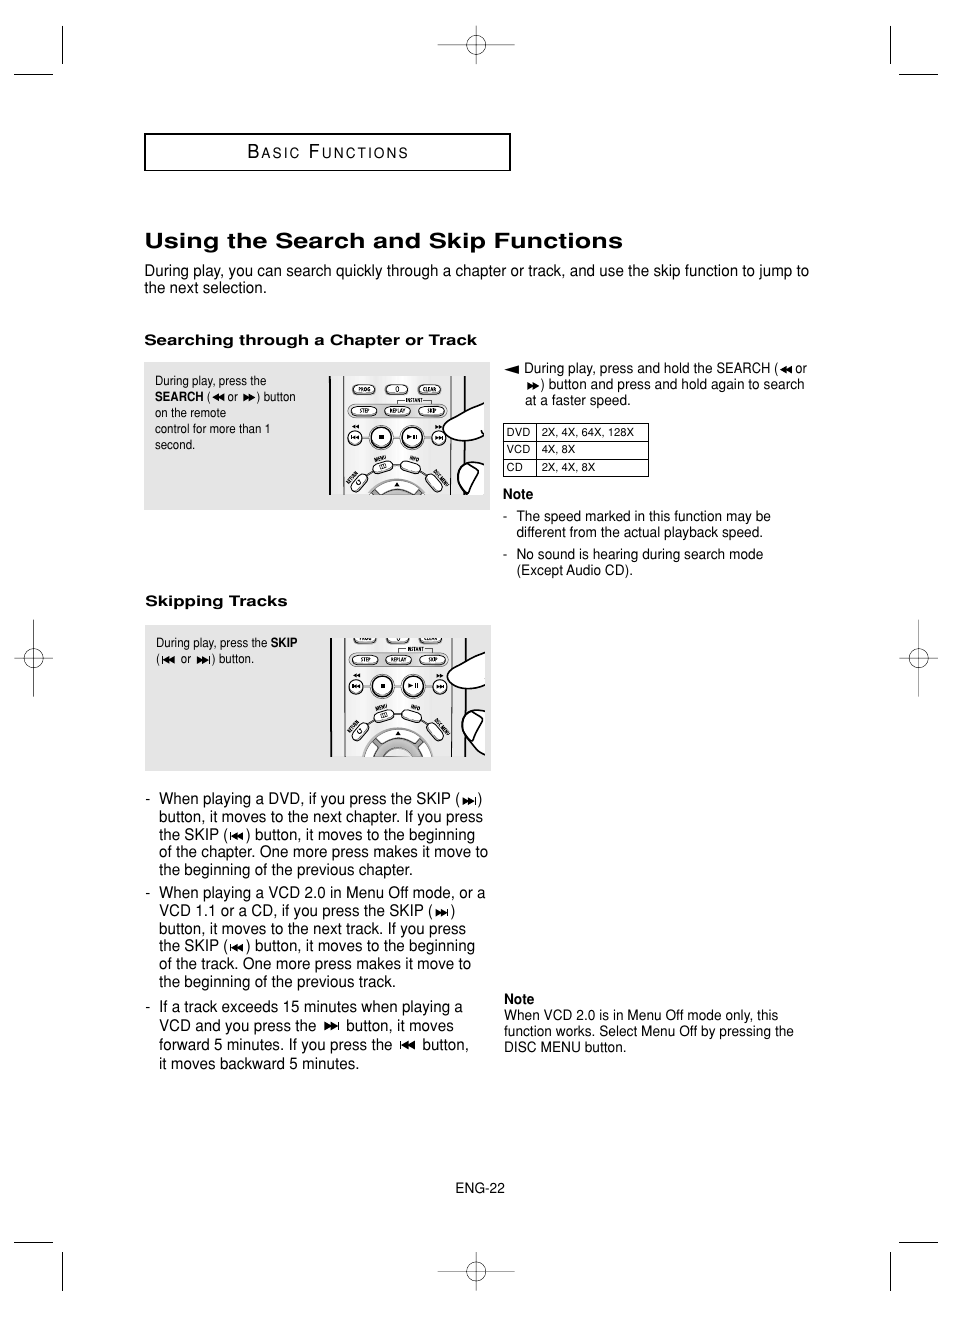 Using the search and skip functions | Samsung DVD-HD845 User Manual | Page 22 / 62